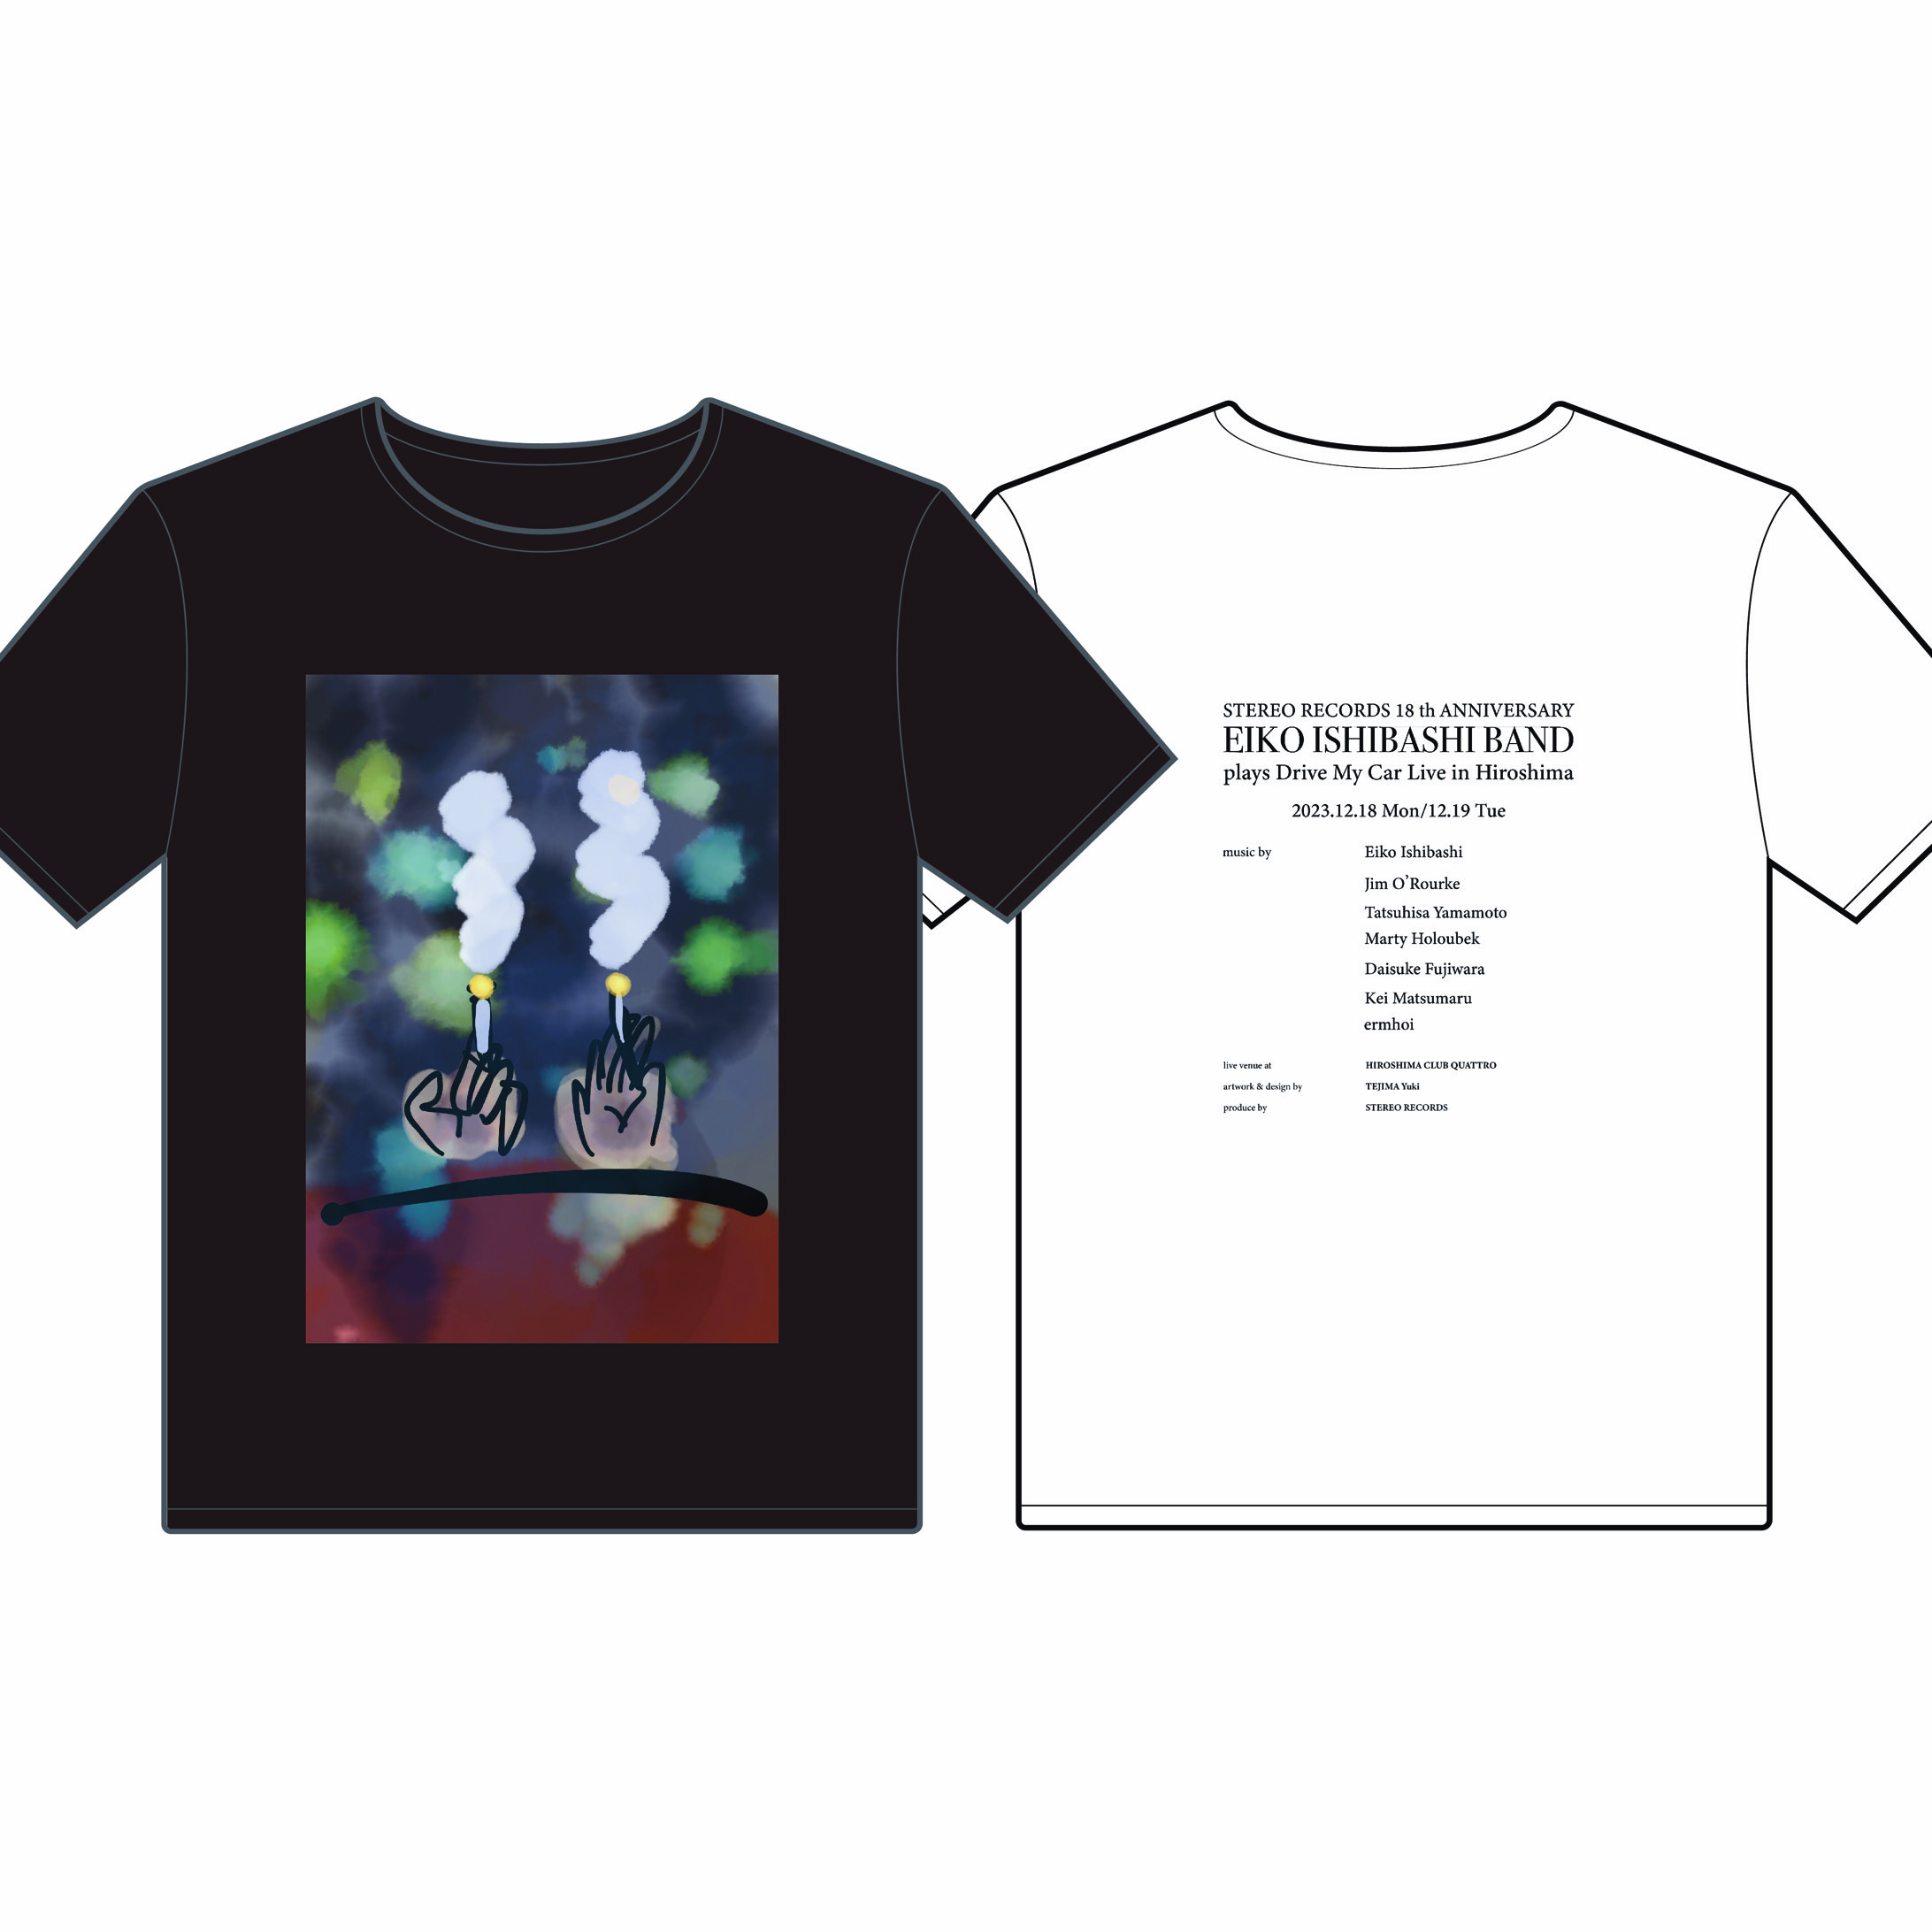 STEREO RECORDS 18th Anniversary T-SHIRTS (BLACK XL SIZE)